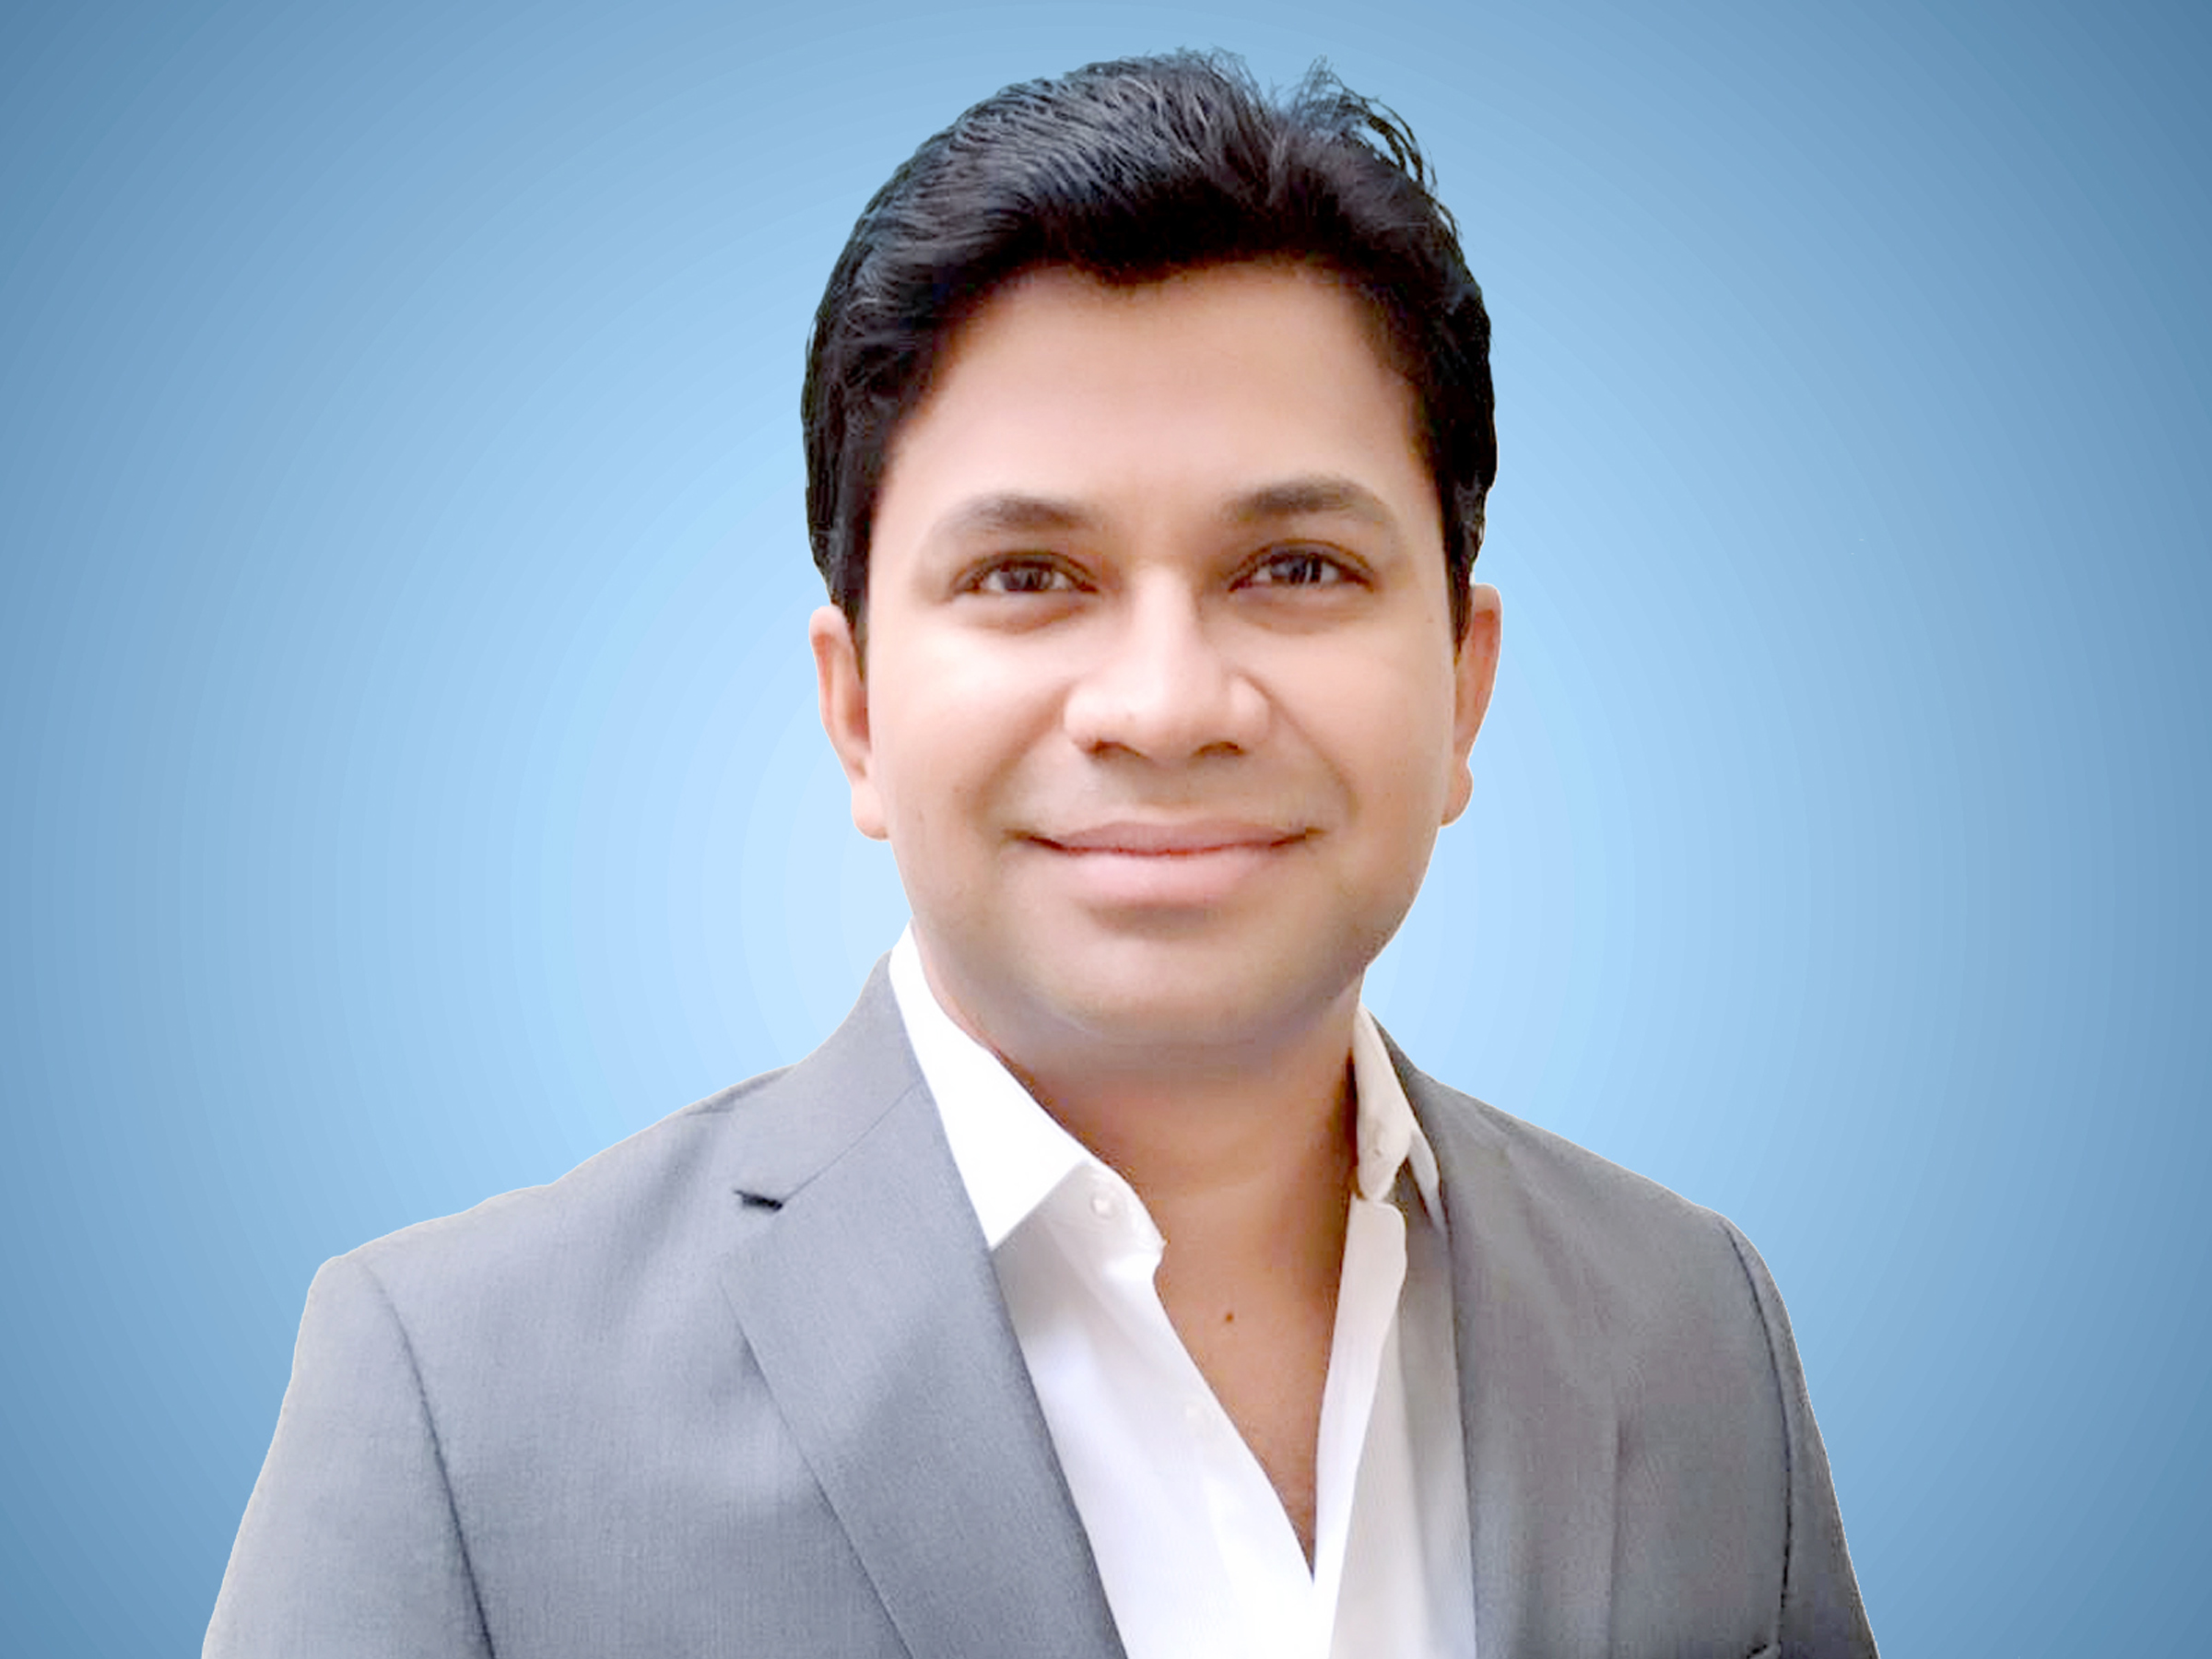 Ashish Laghate, Housing.com, India real estate news, India property news, Indian property market, Online property market, Track2Realty, NRI investment